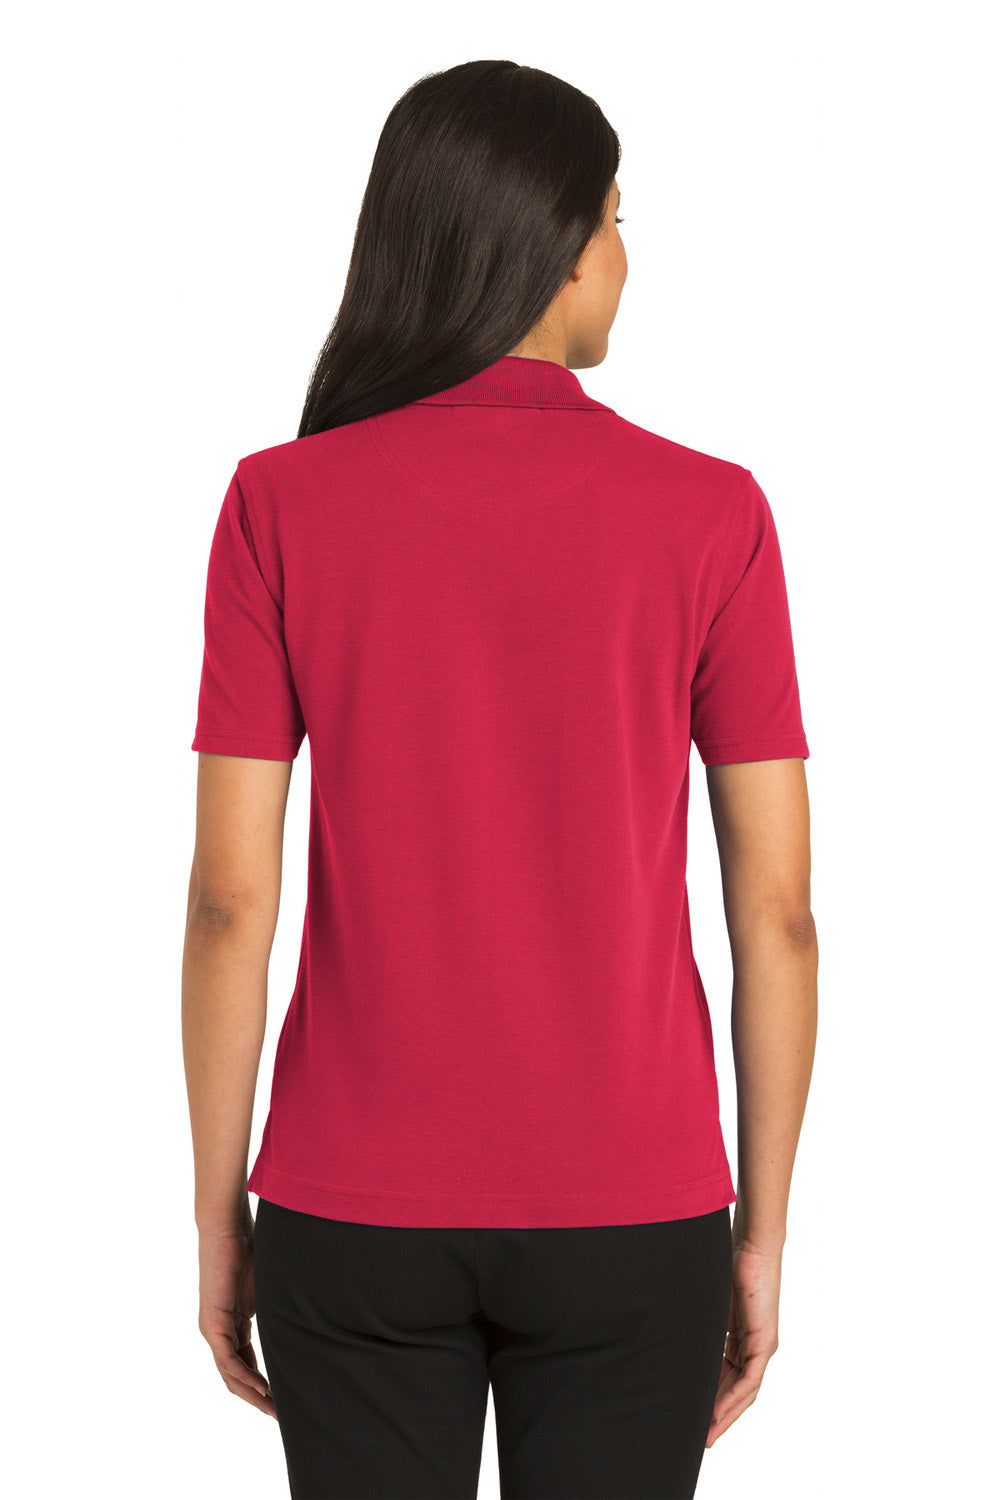 Port Authority L455 Womens Rapid Dry Moisture Wicking Short Sleeve Polo Shirt Red Back